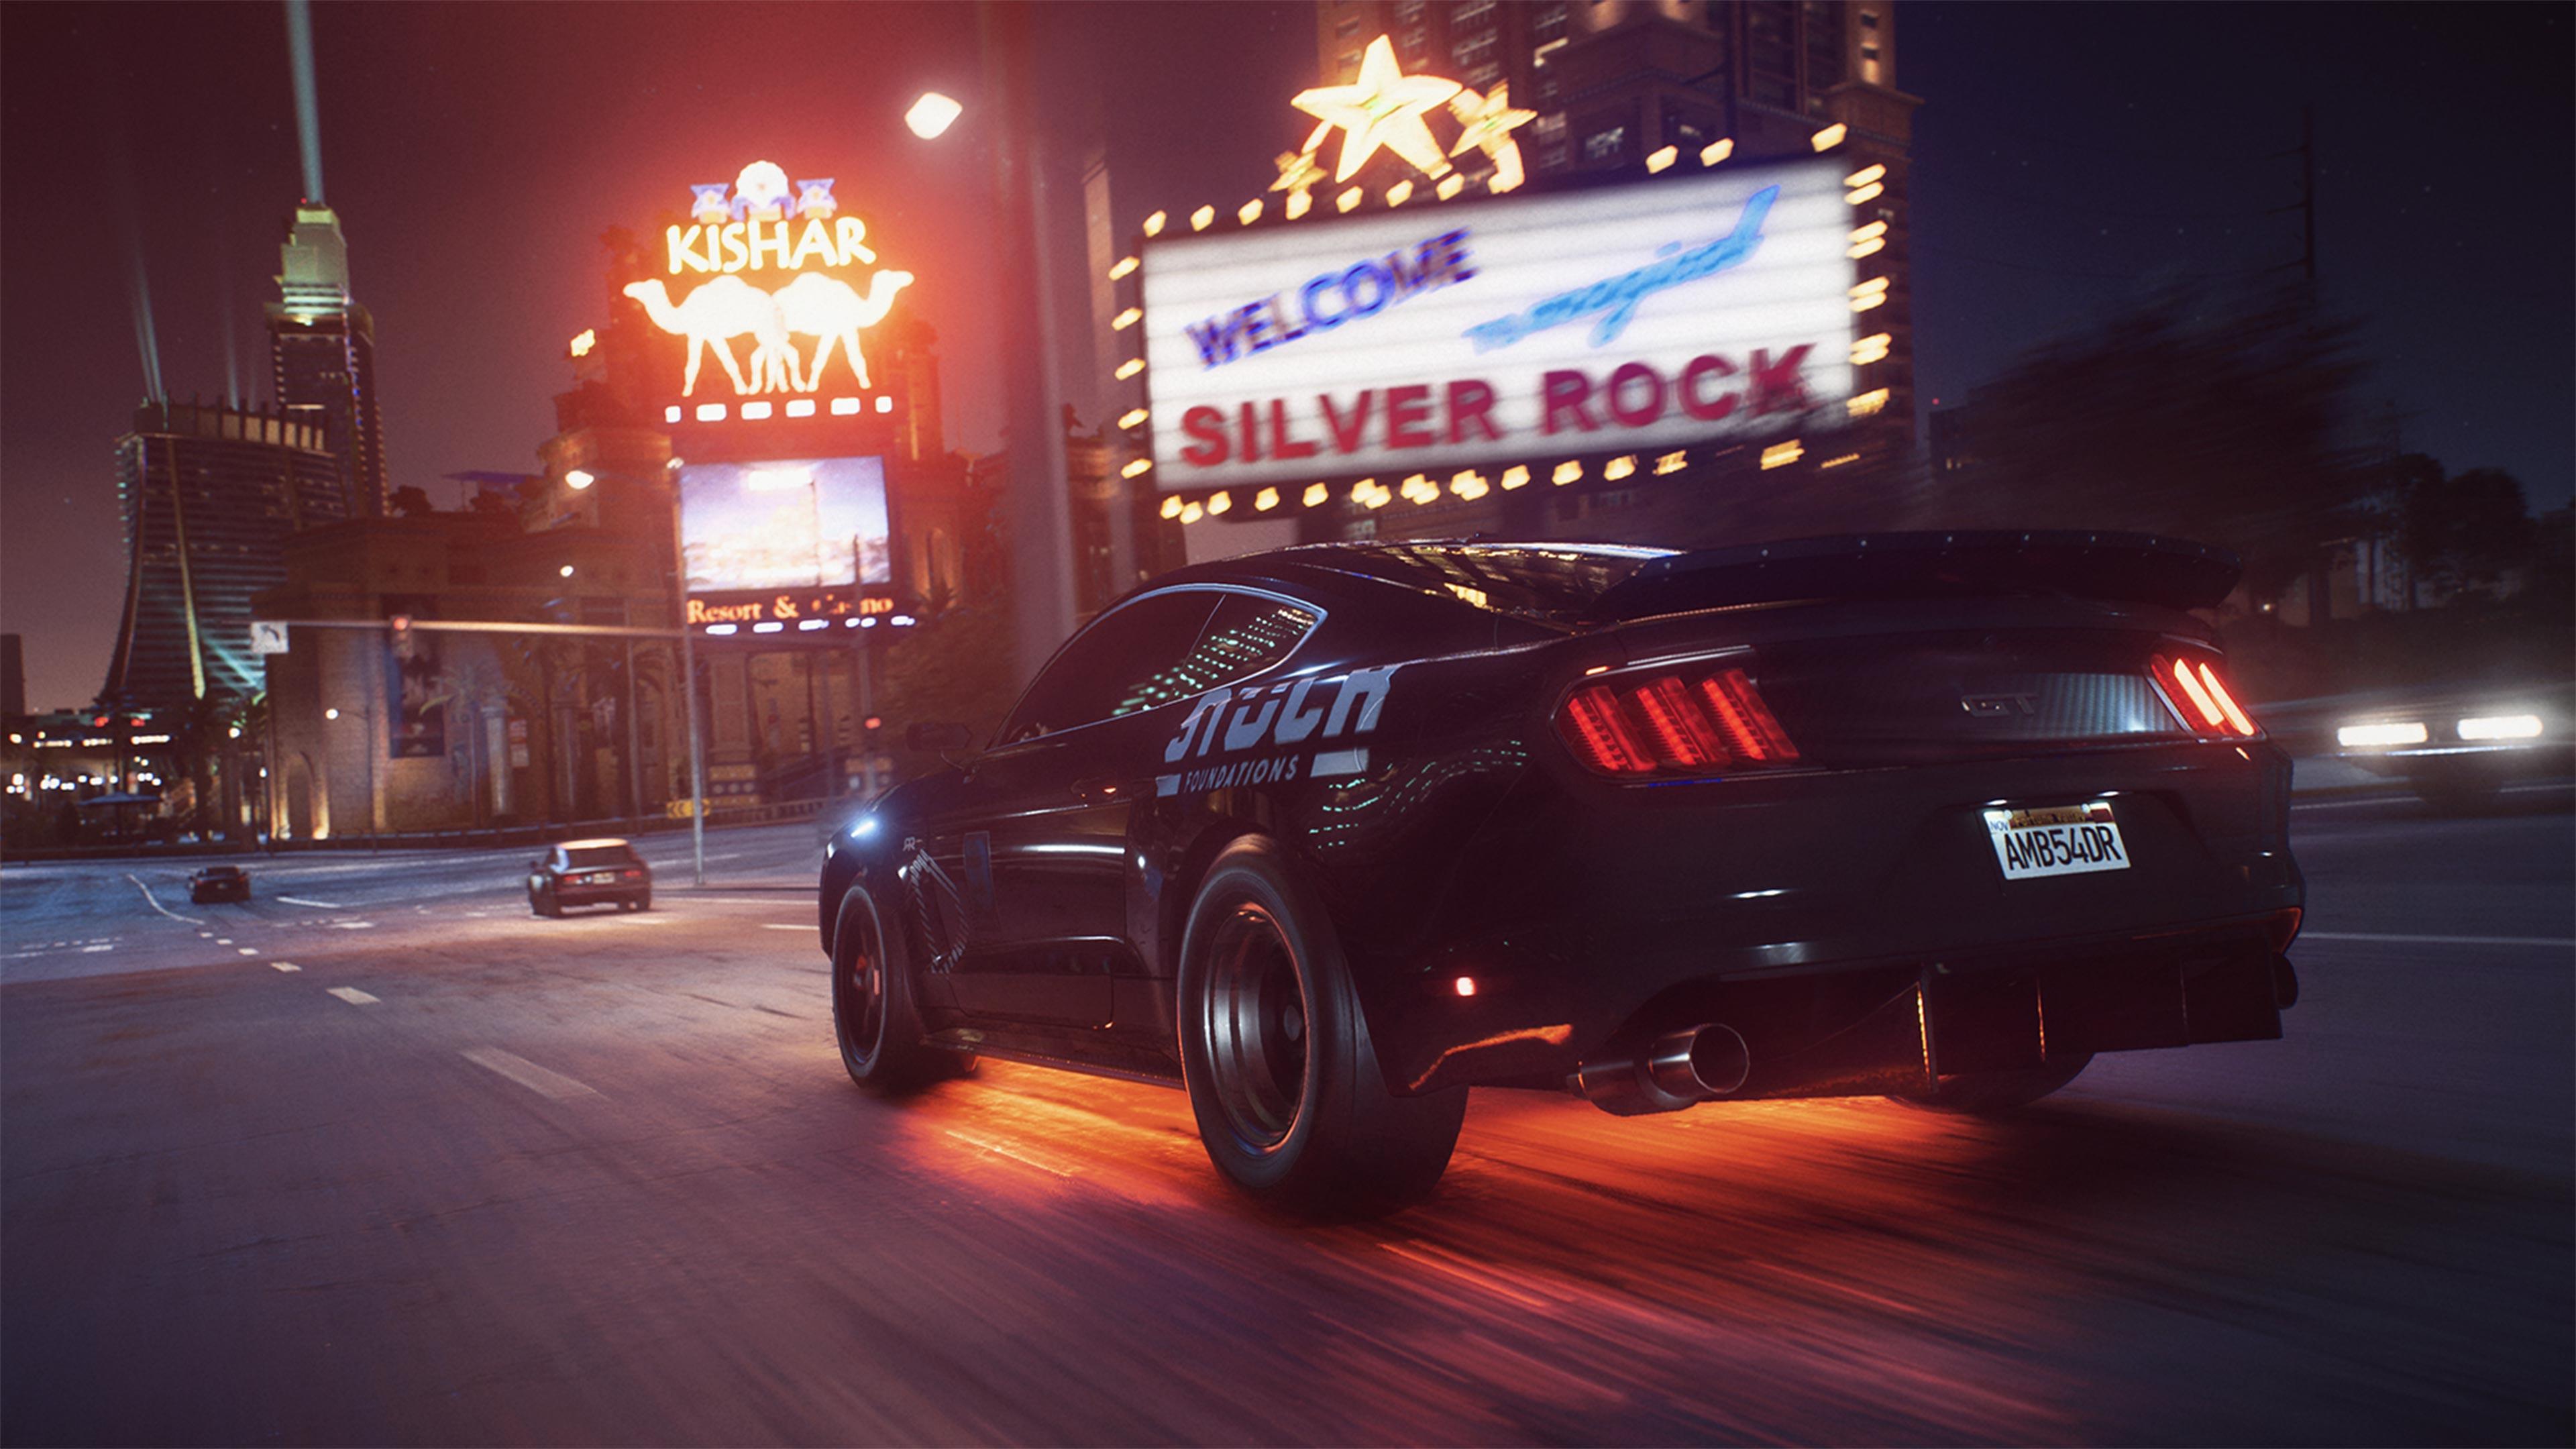 Need For Speed Payback Underglow 4k. Awesome Desktop HD Wallpaper